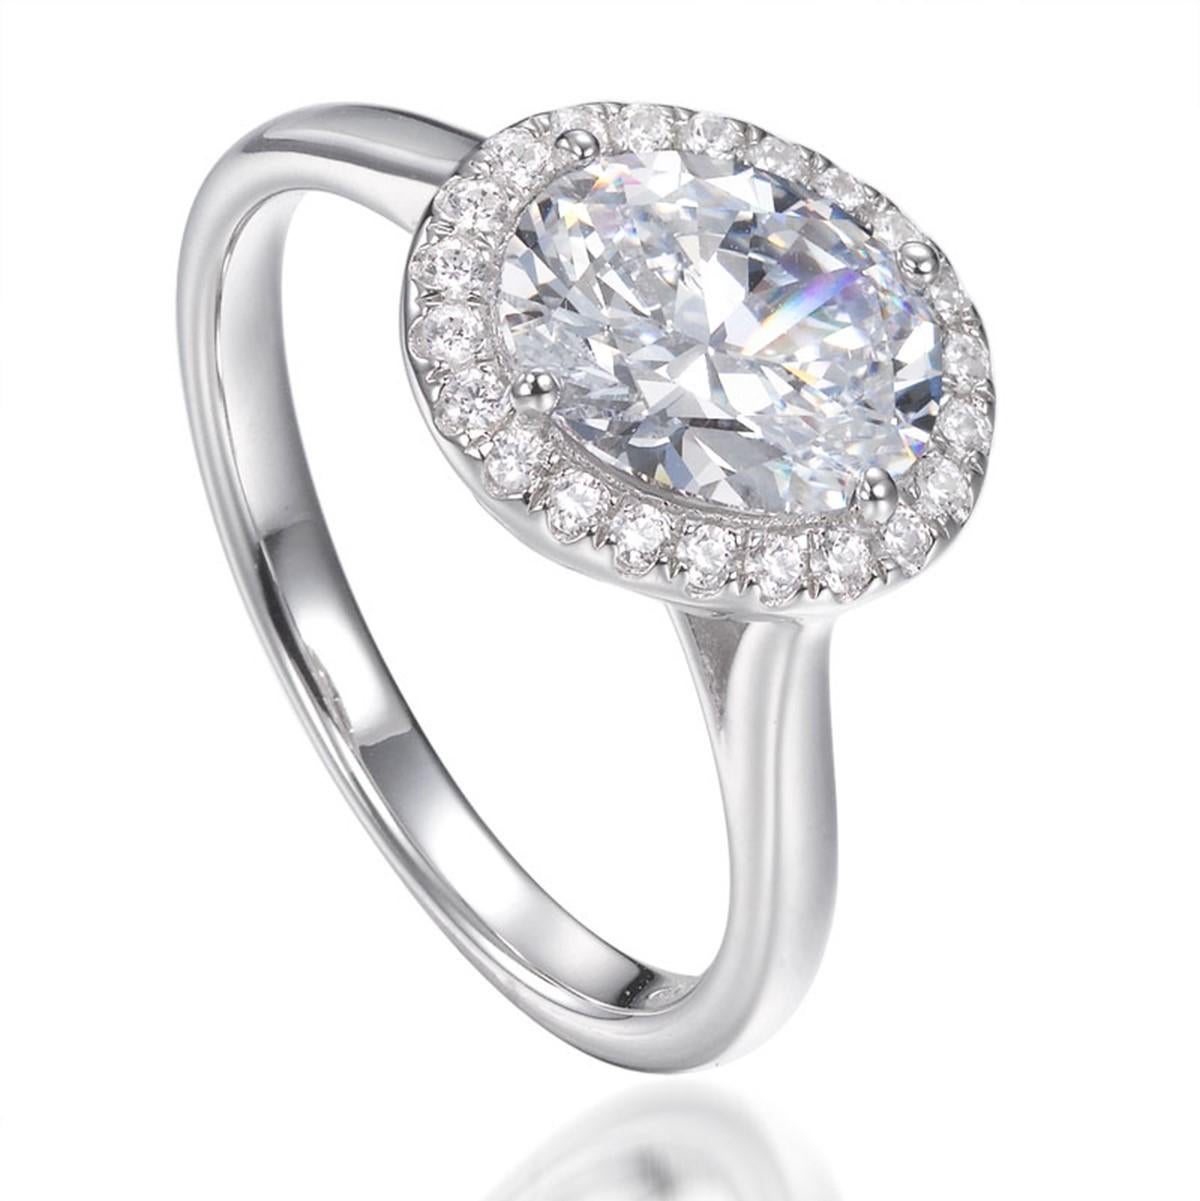 The contemporary nature of this highly intriguing ring captures the most unusual of designs.

Featuring a slightly off-set oval cubic zirconia measuring 1.46ct, surrounded by twenty-two of the highest quality micro set round brilliant cut cubic